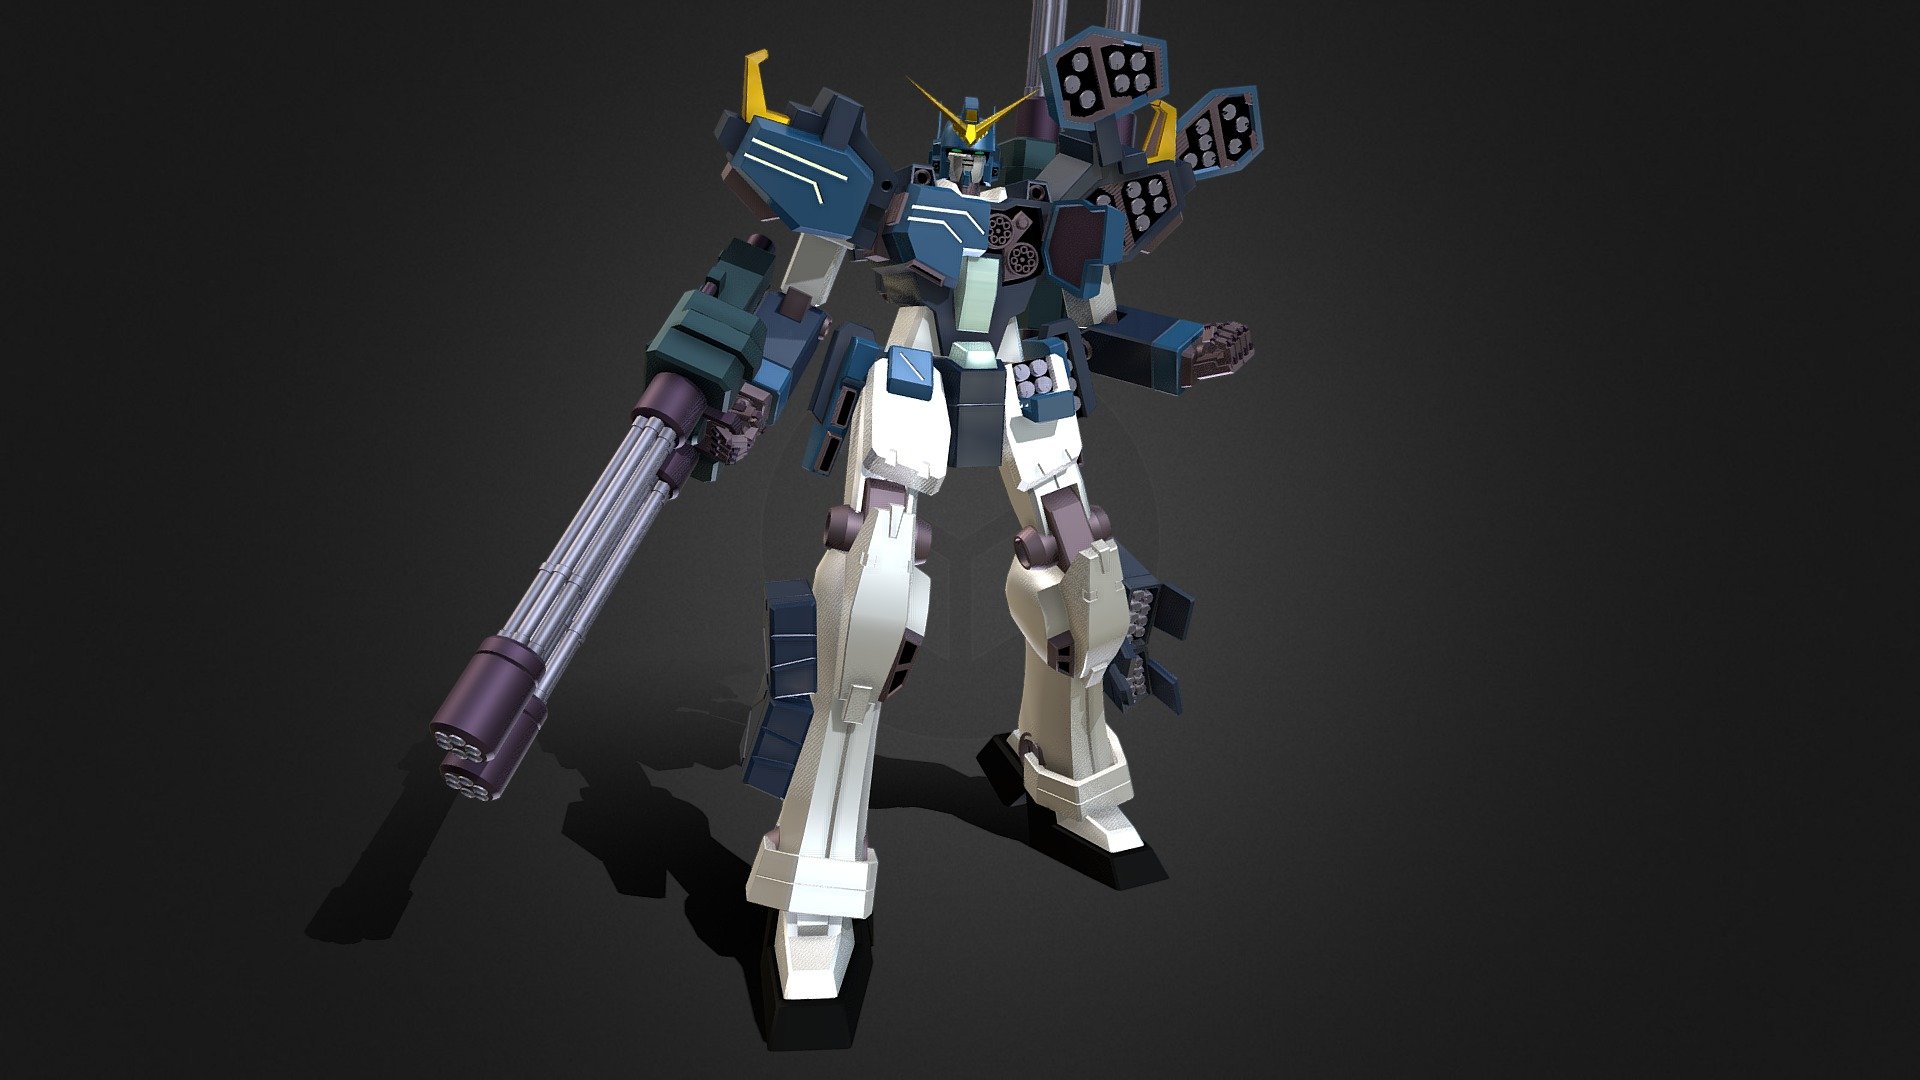 If you’re interested in purchasing any of my models, contact me @ andrewdisaacs@yahoo.com

Heavyarms Custom, as seen in Gundam Wing Endless Waltz.

Made in 3DS Max by myself 3d model